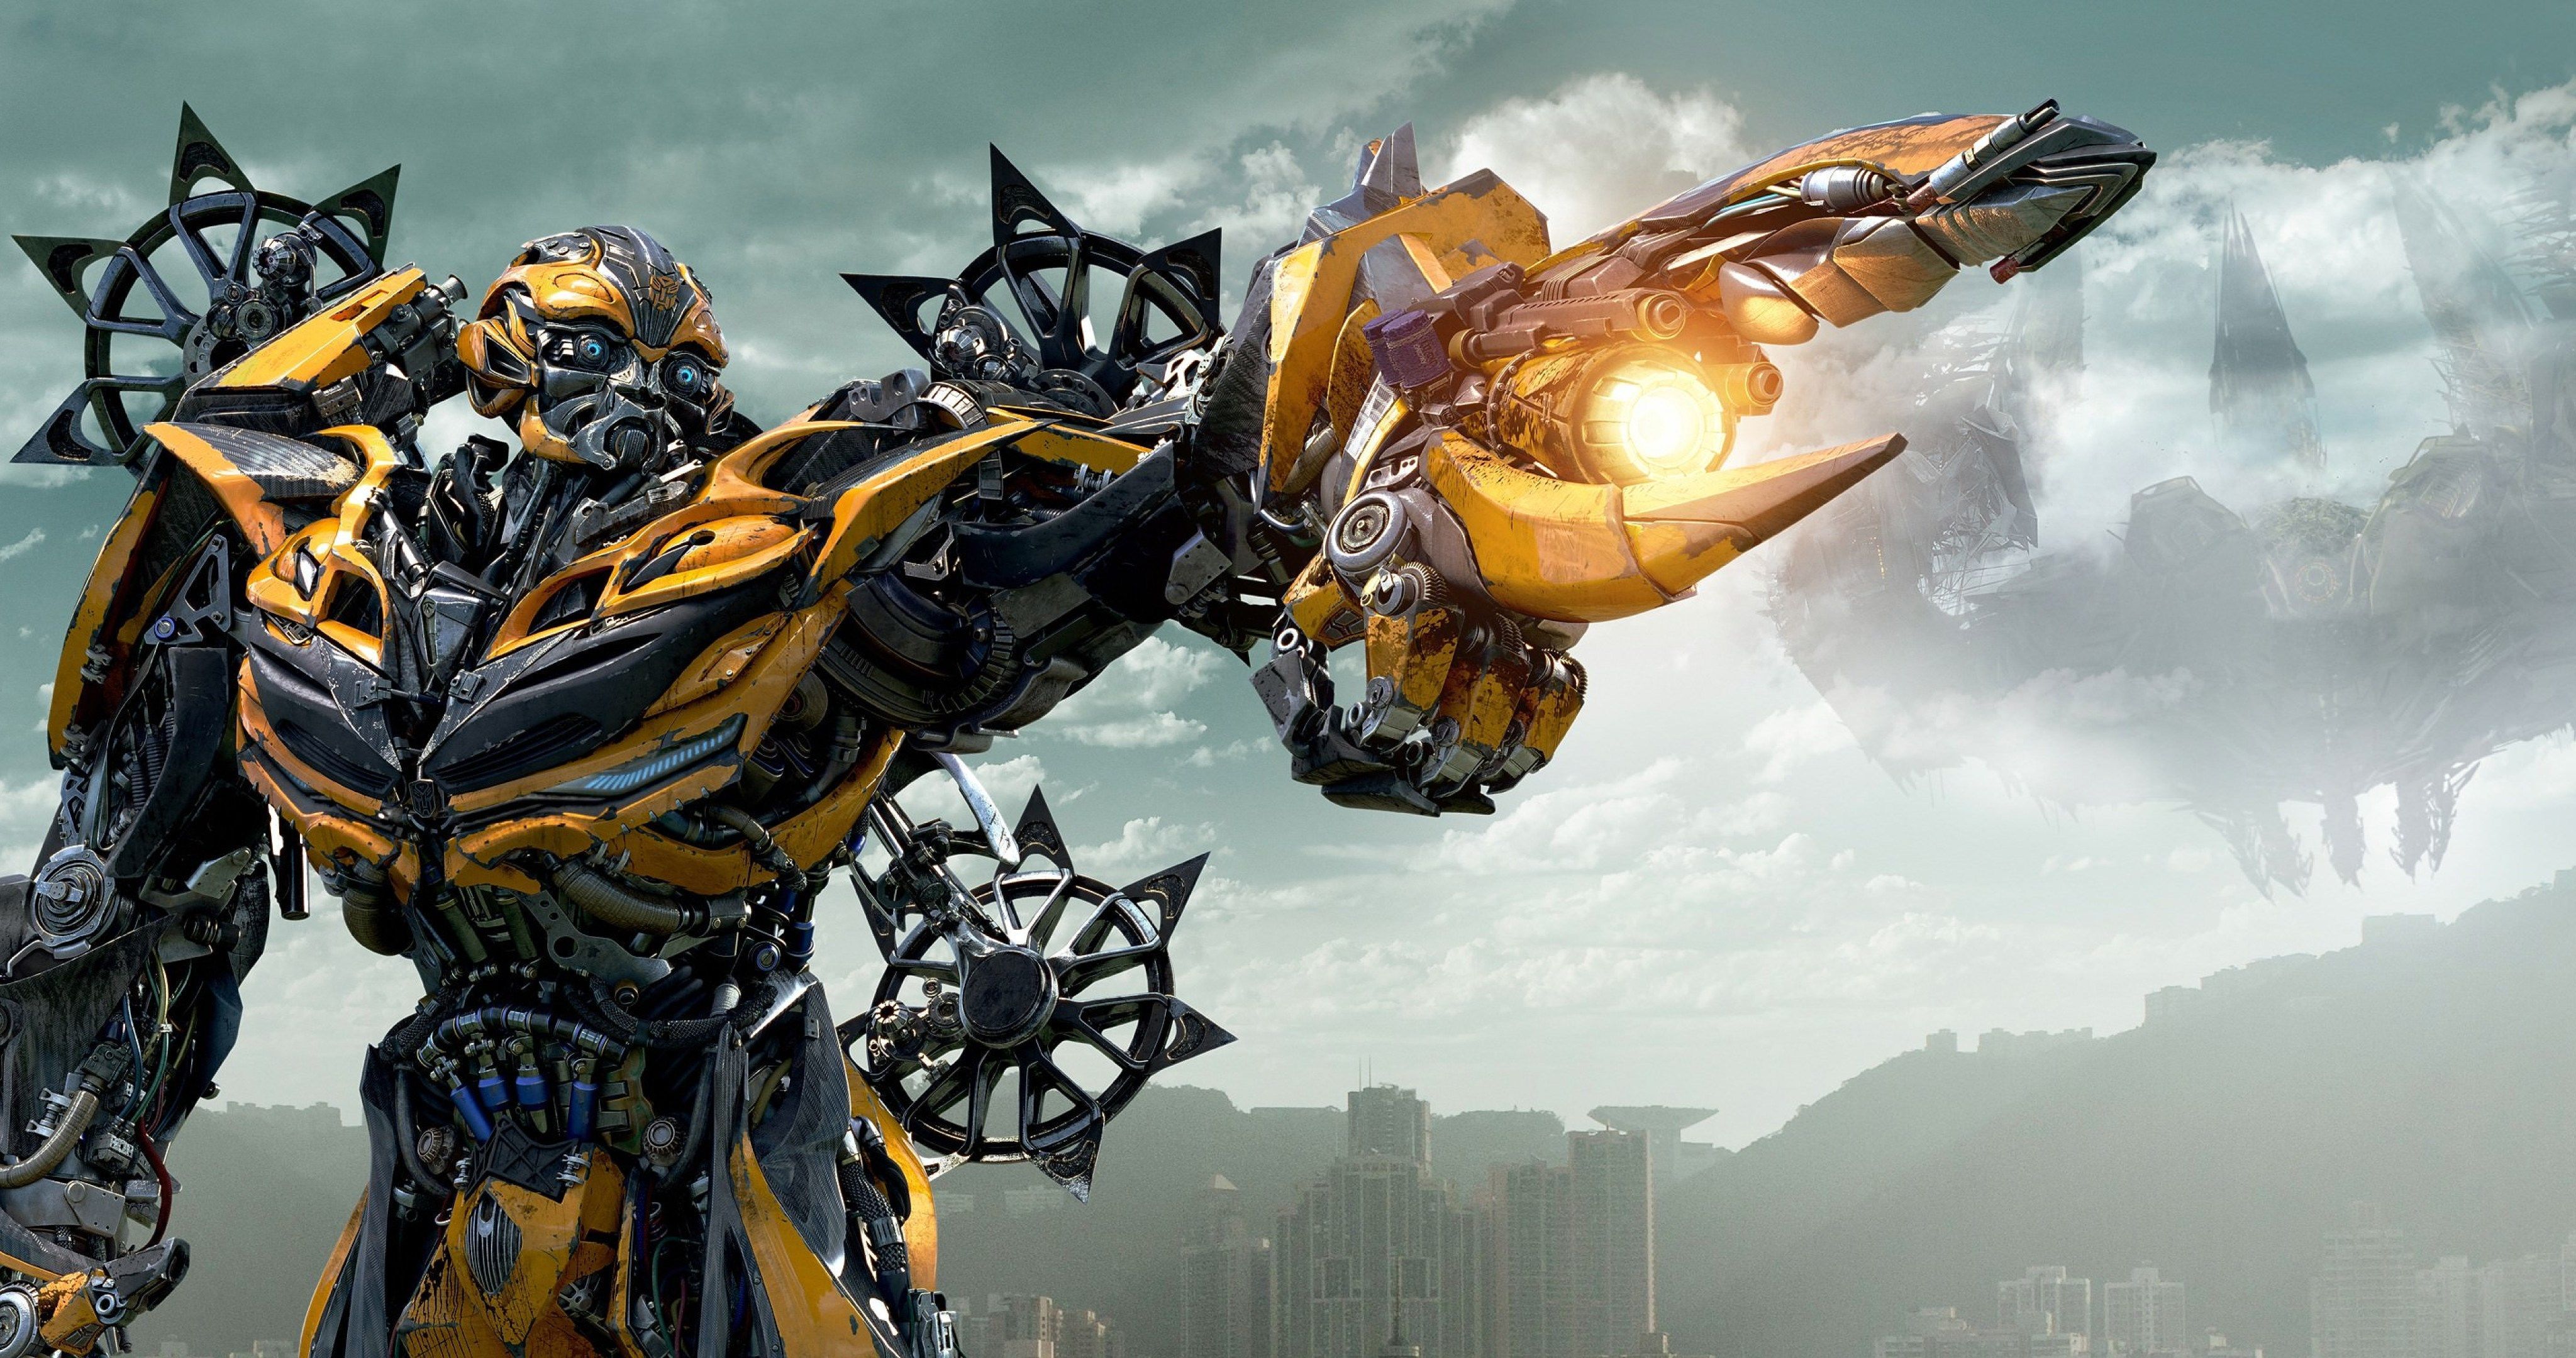 Transformers Age Of Extinction 4k Ultra Hd Wallpaper - Transformers 4k Ultra Hd - HD Wallpaper 